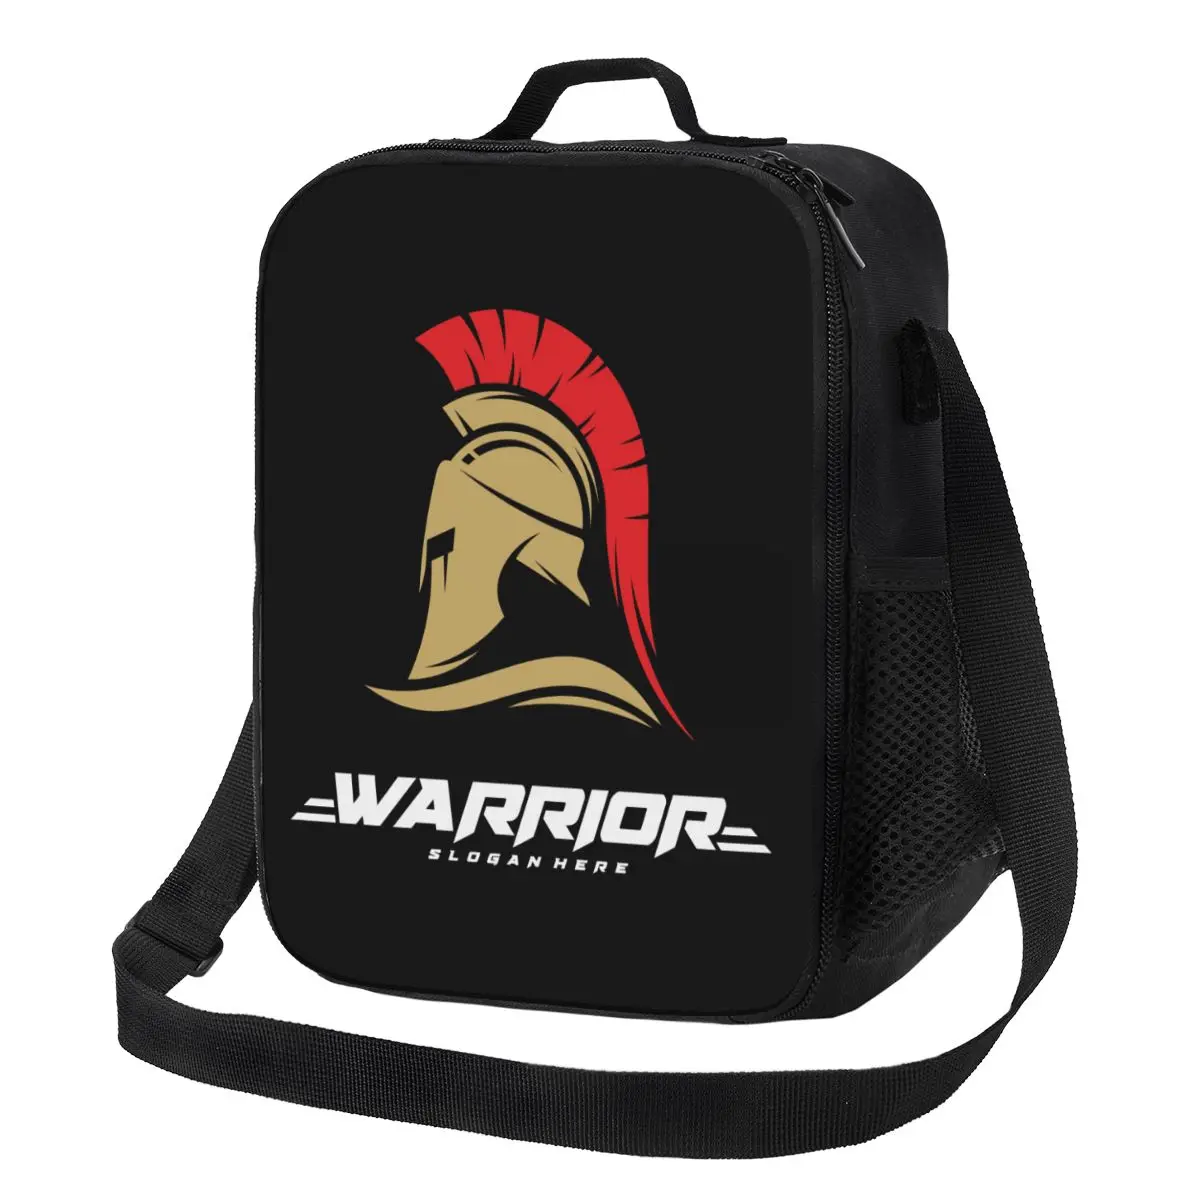 

Sparta Spirit Spartan Warrior Insulated Lunch Bag for School Office Leakproof Cooler Thermal Bento Box Women Kids